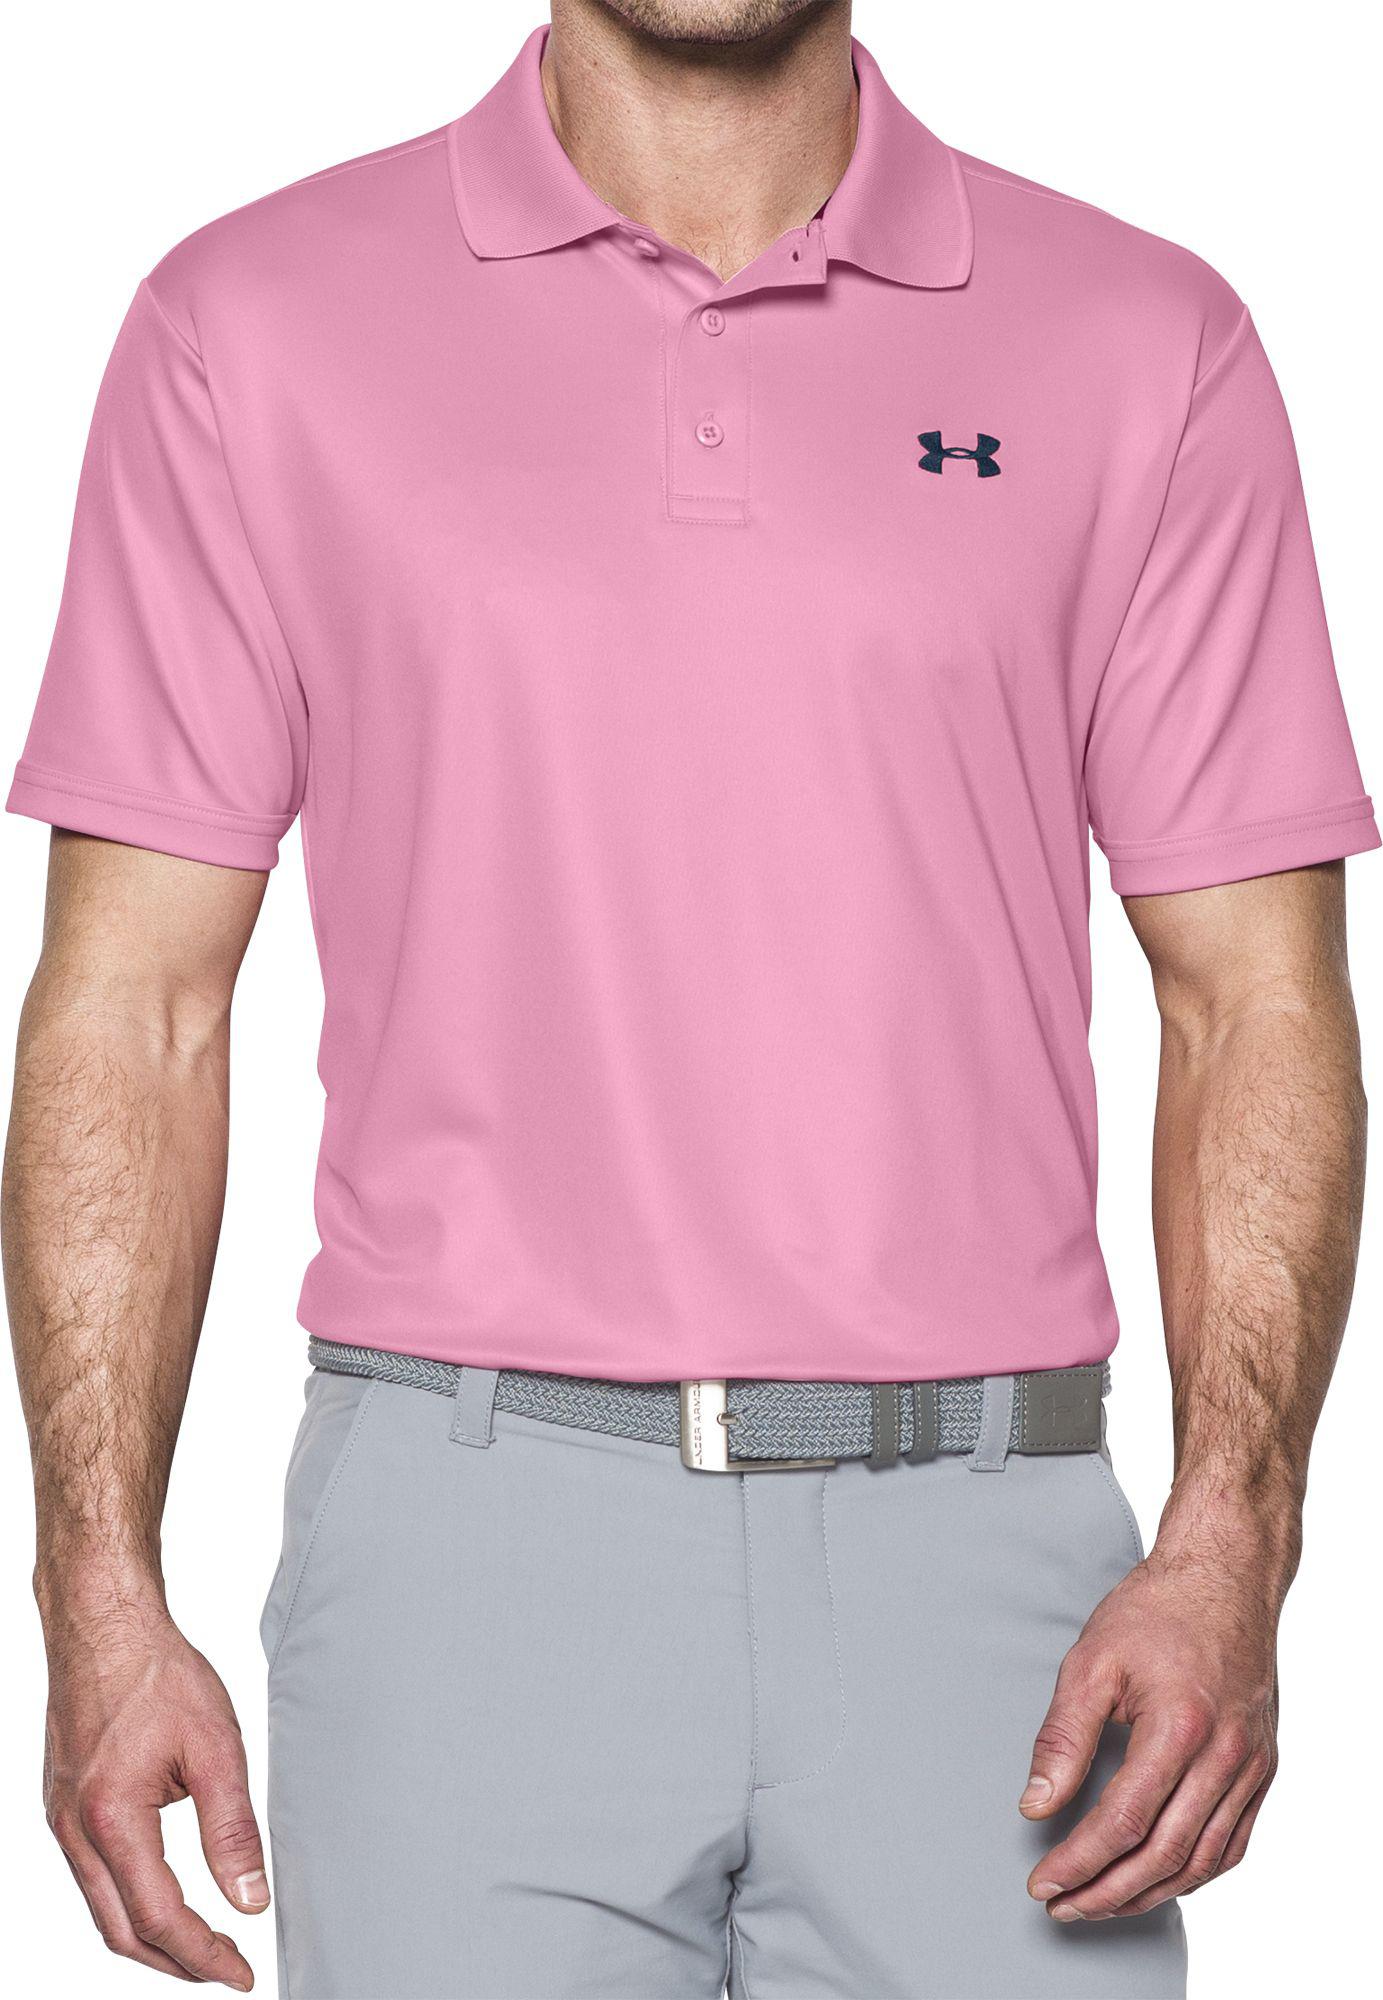 under armour big & tall polo shirts